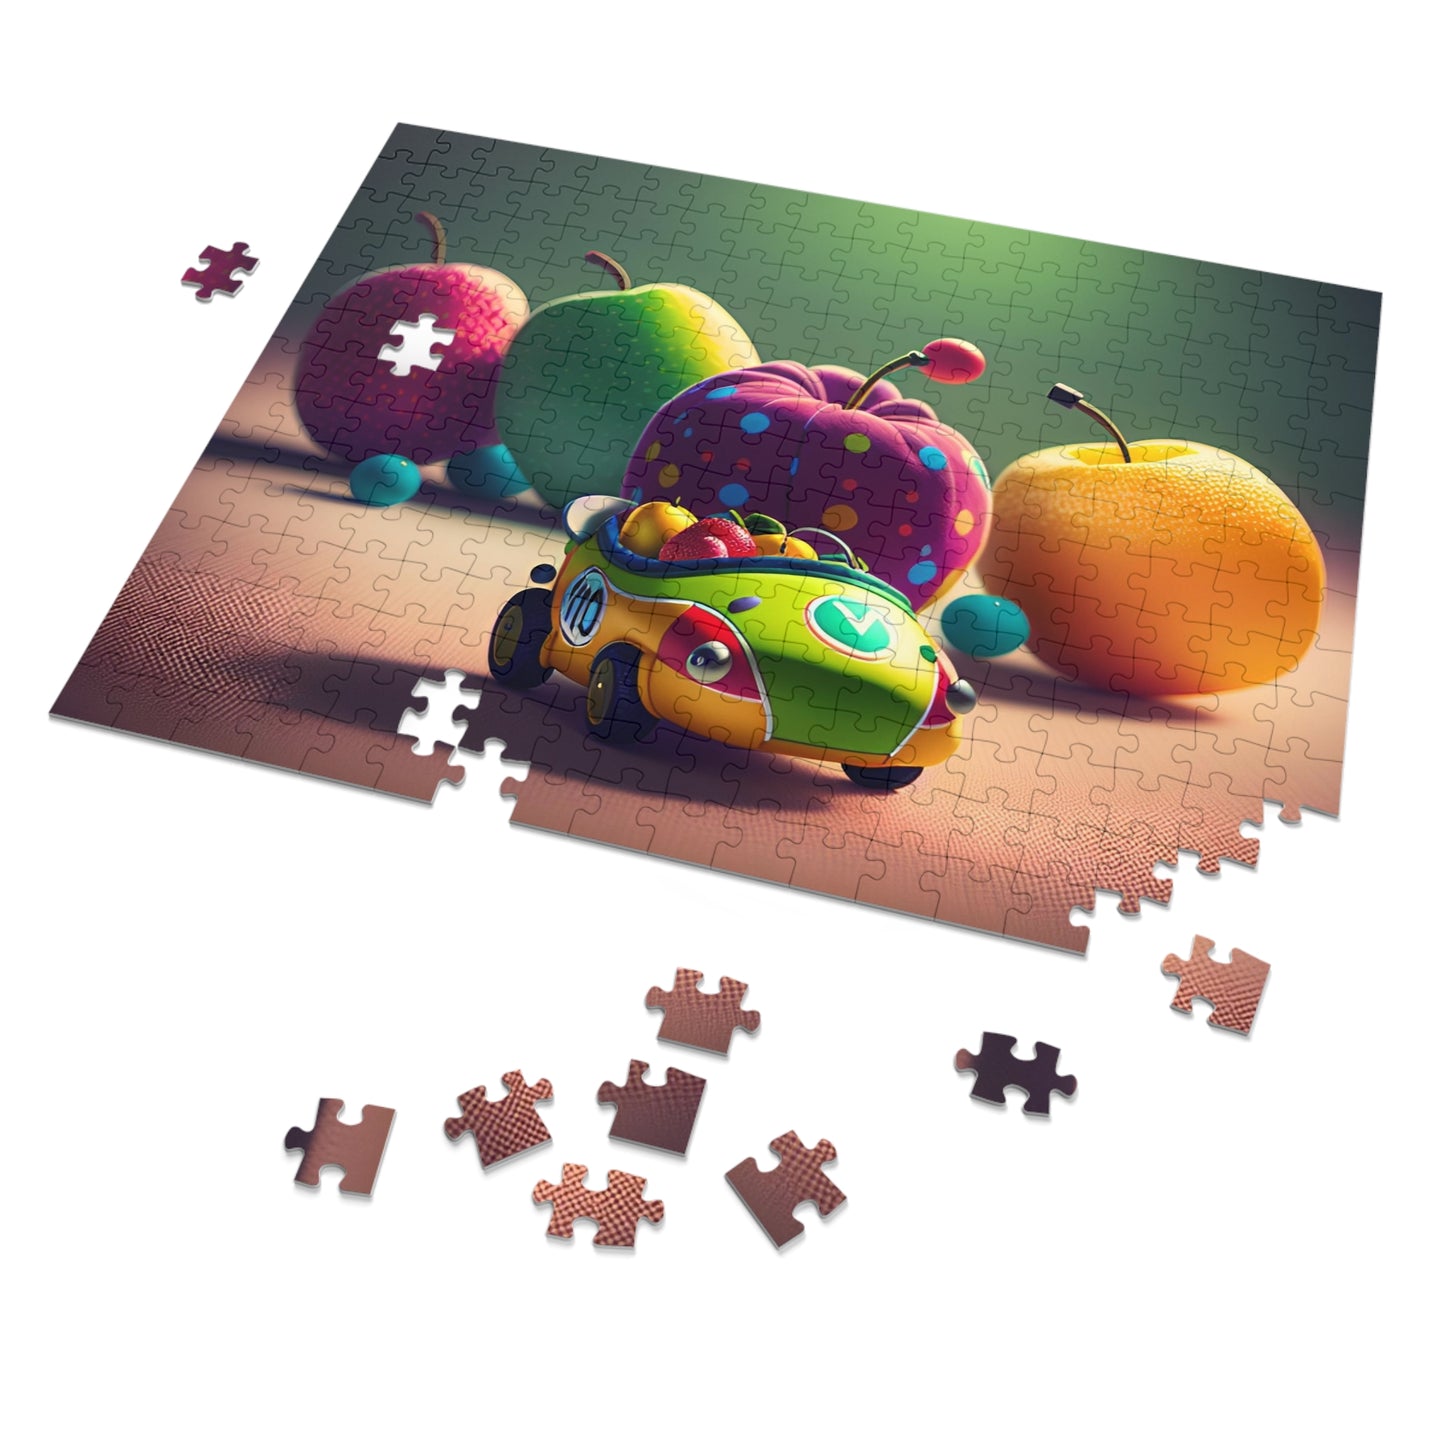 Video Game Go-Kart Inspired Jigsaw Puzzle, 252-Piece